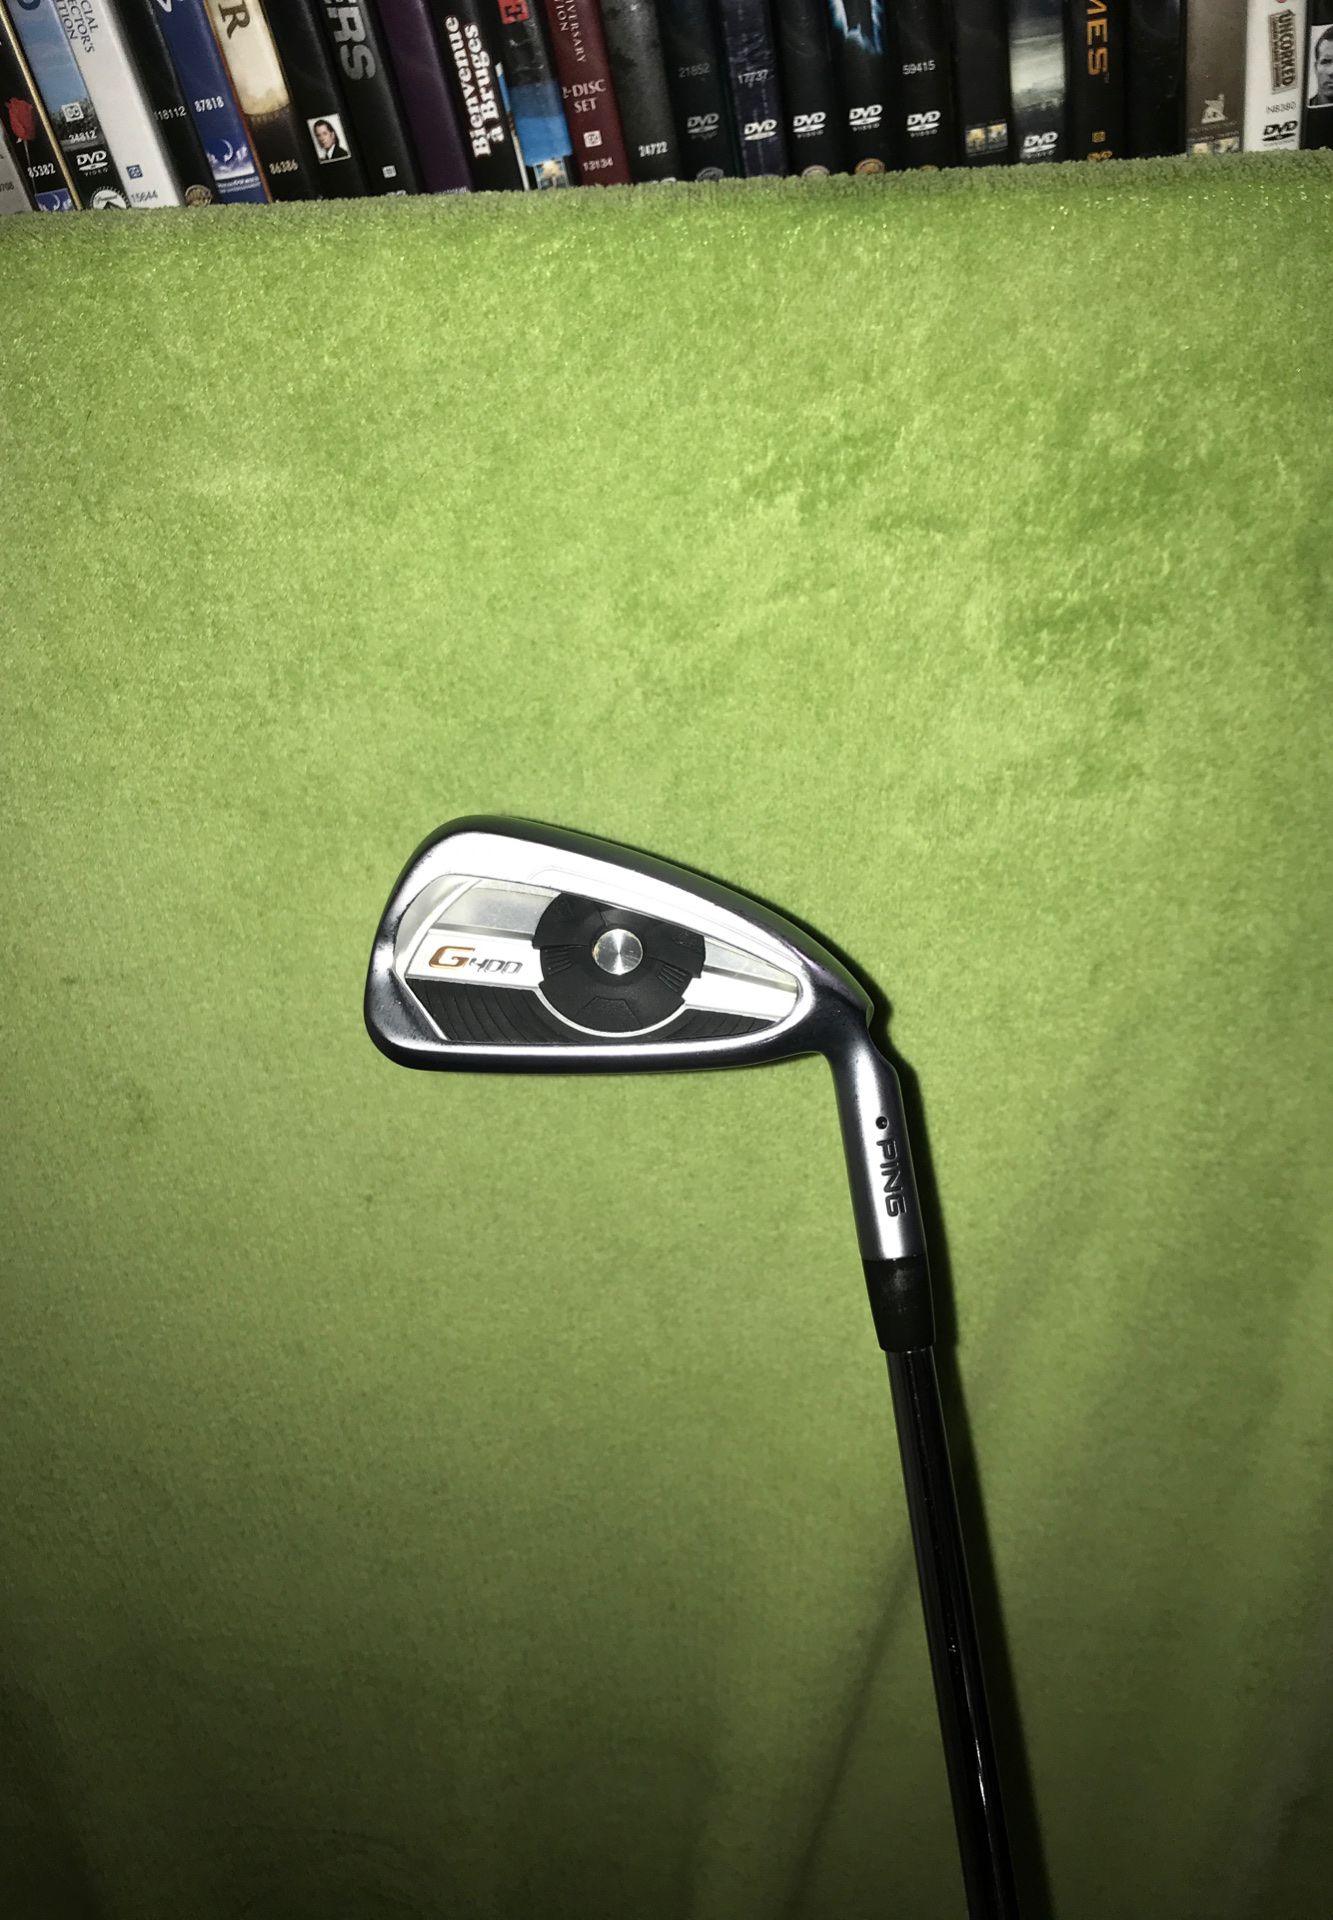 Ping g400 6 iron. Black dot. Right handed.